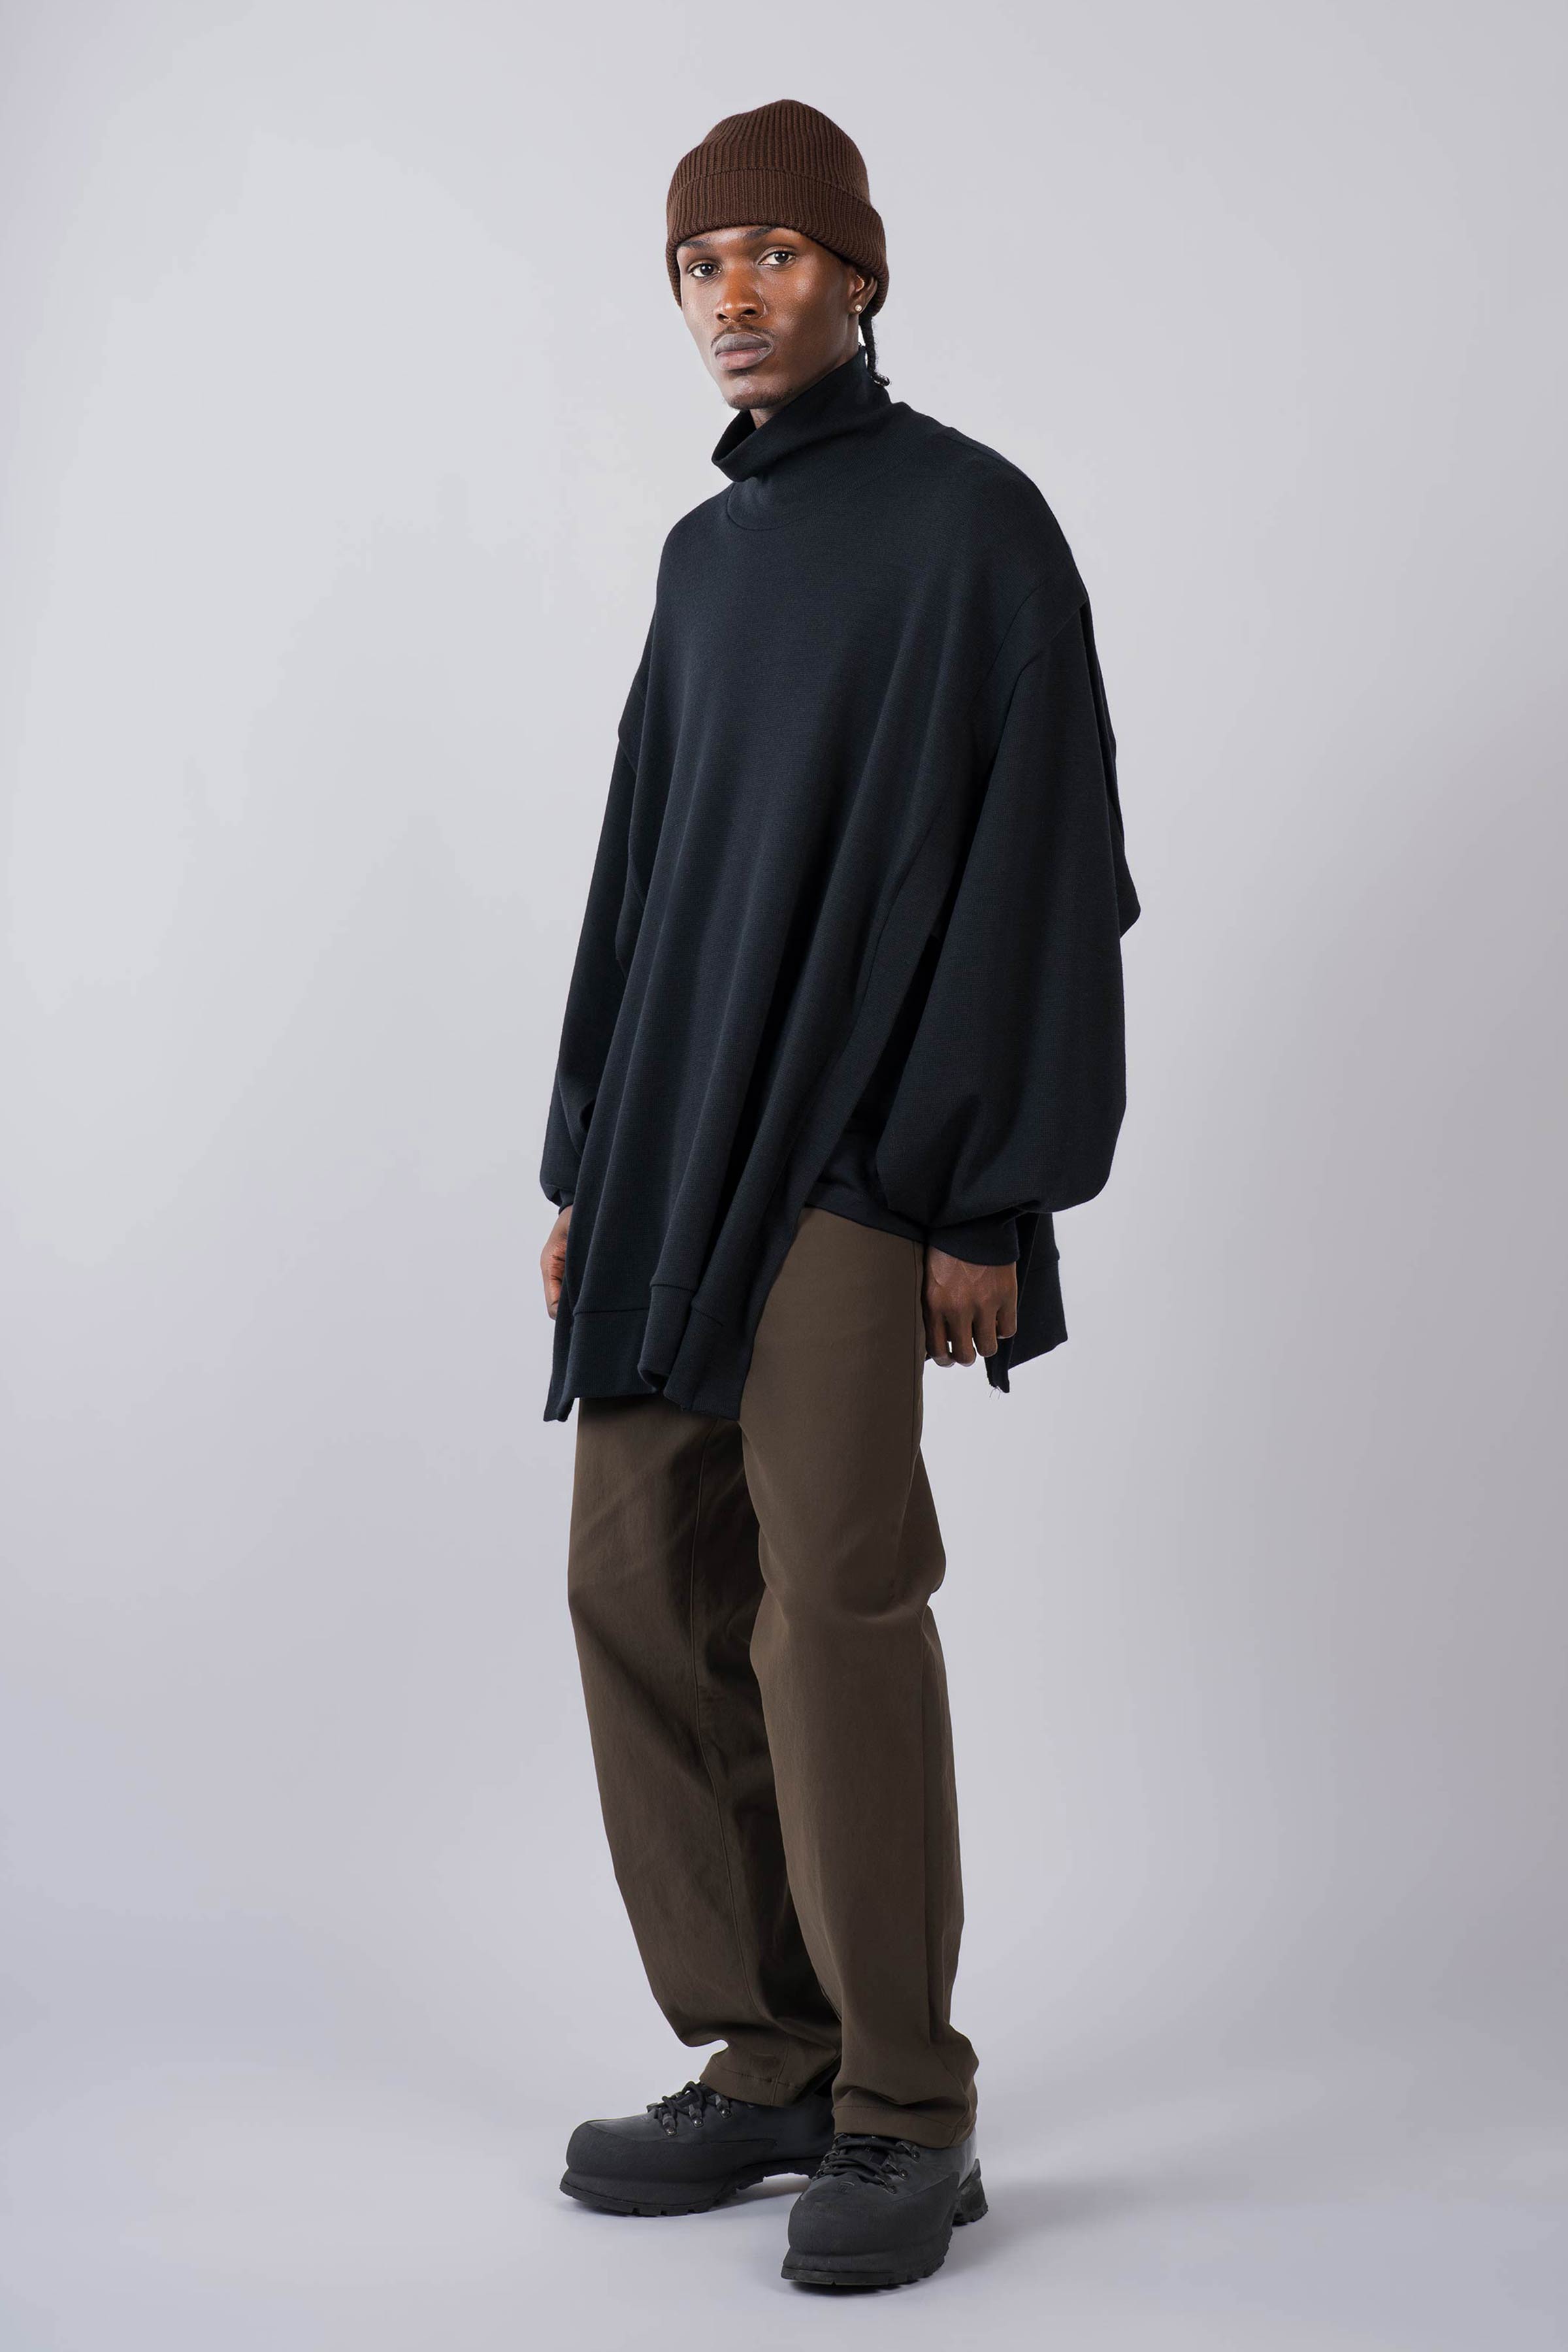 Experiment 392 - Warmform Sleeved Poncho